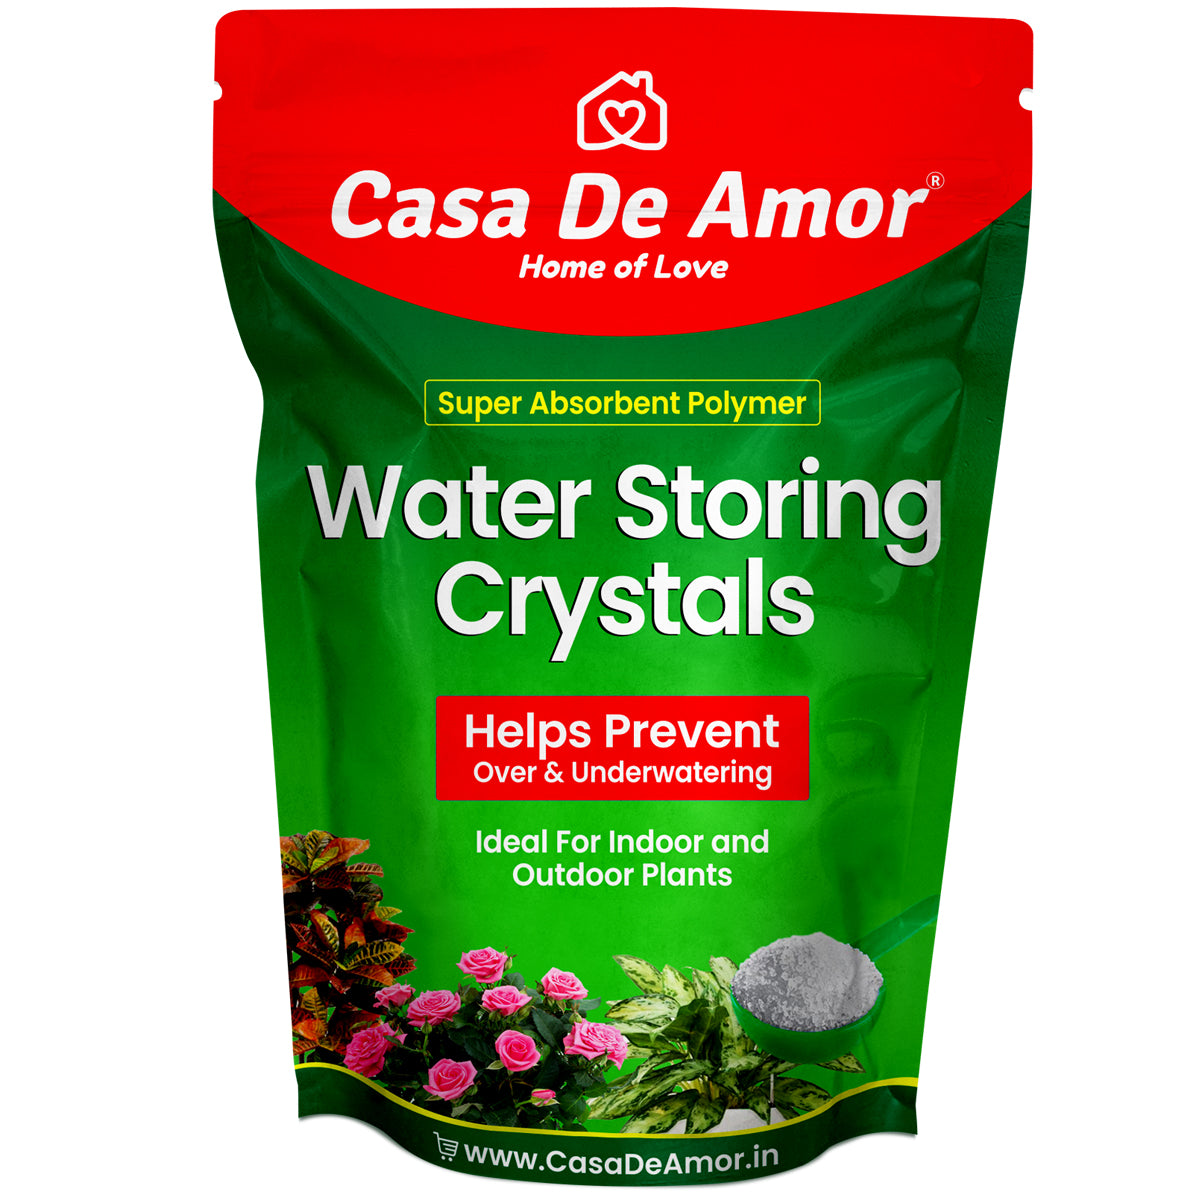 Casa De Amor Water Retaining Super Absorbent Polymer for Soil Mixing and Hydroponics Gardening